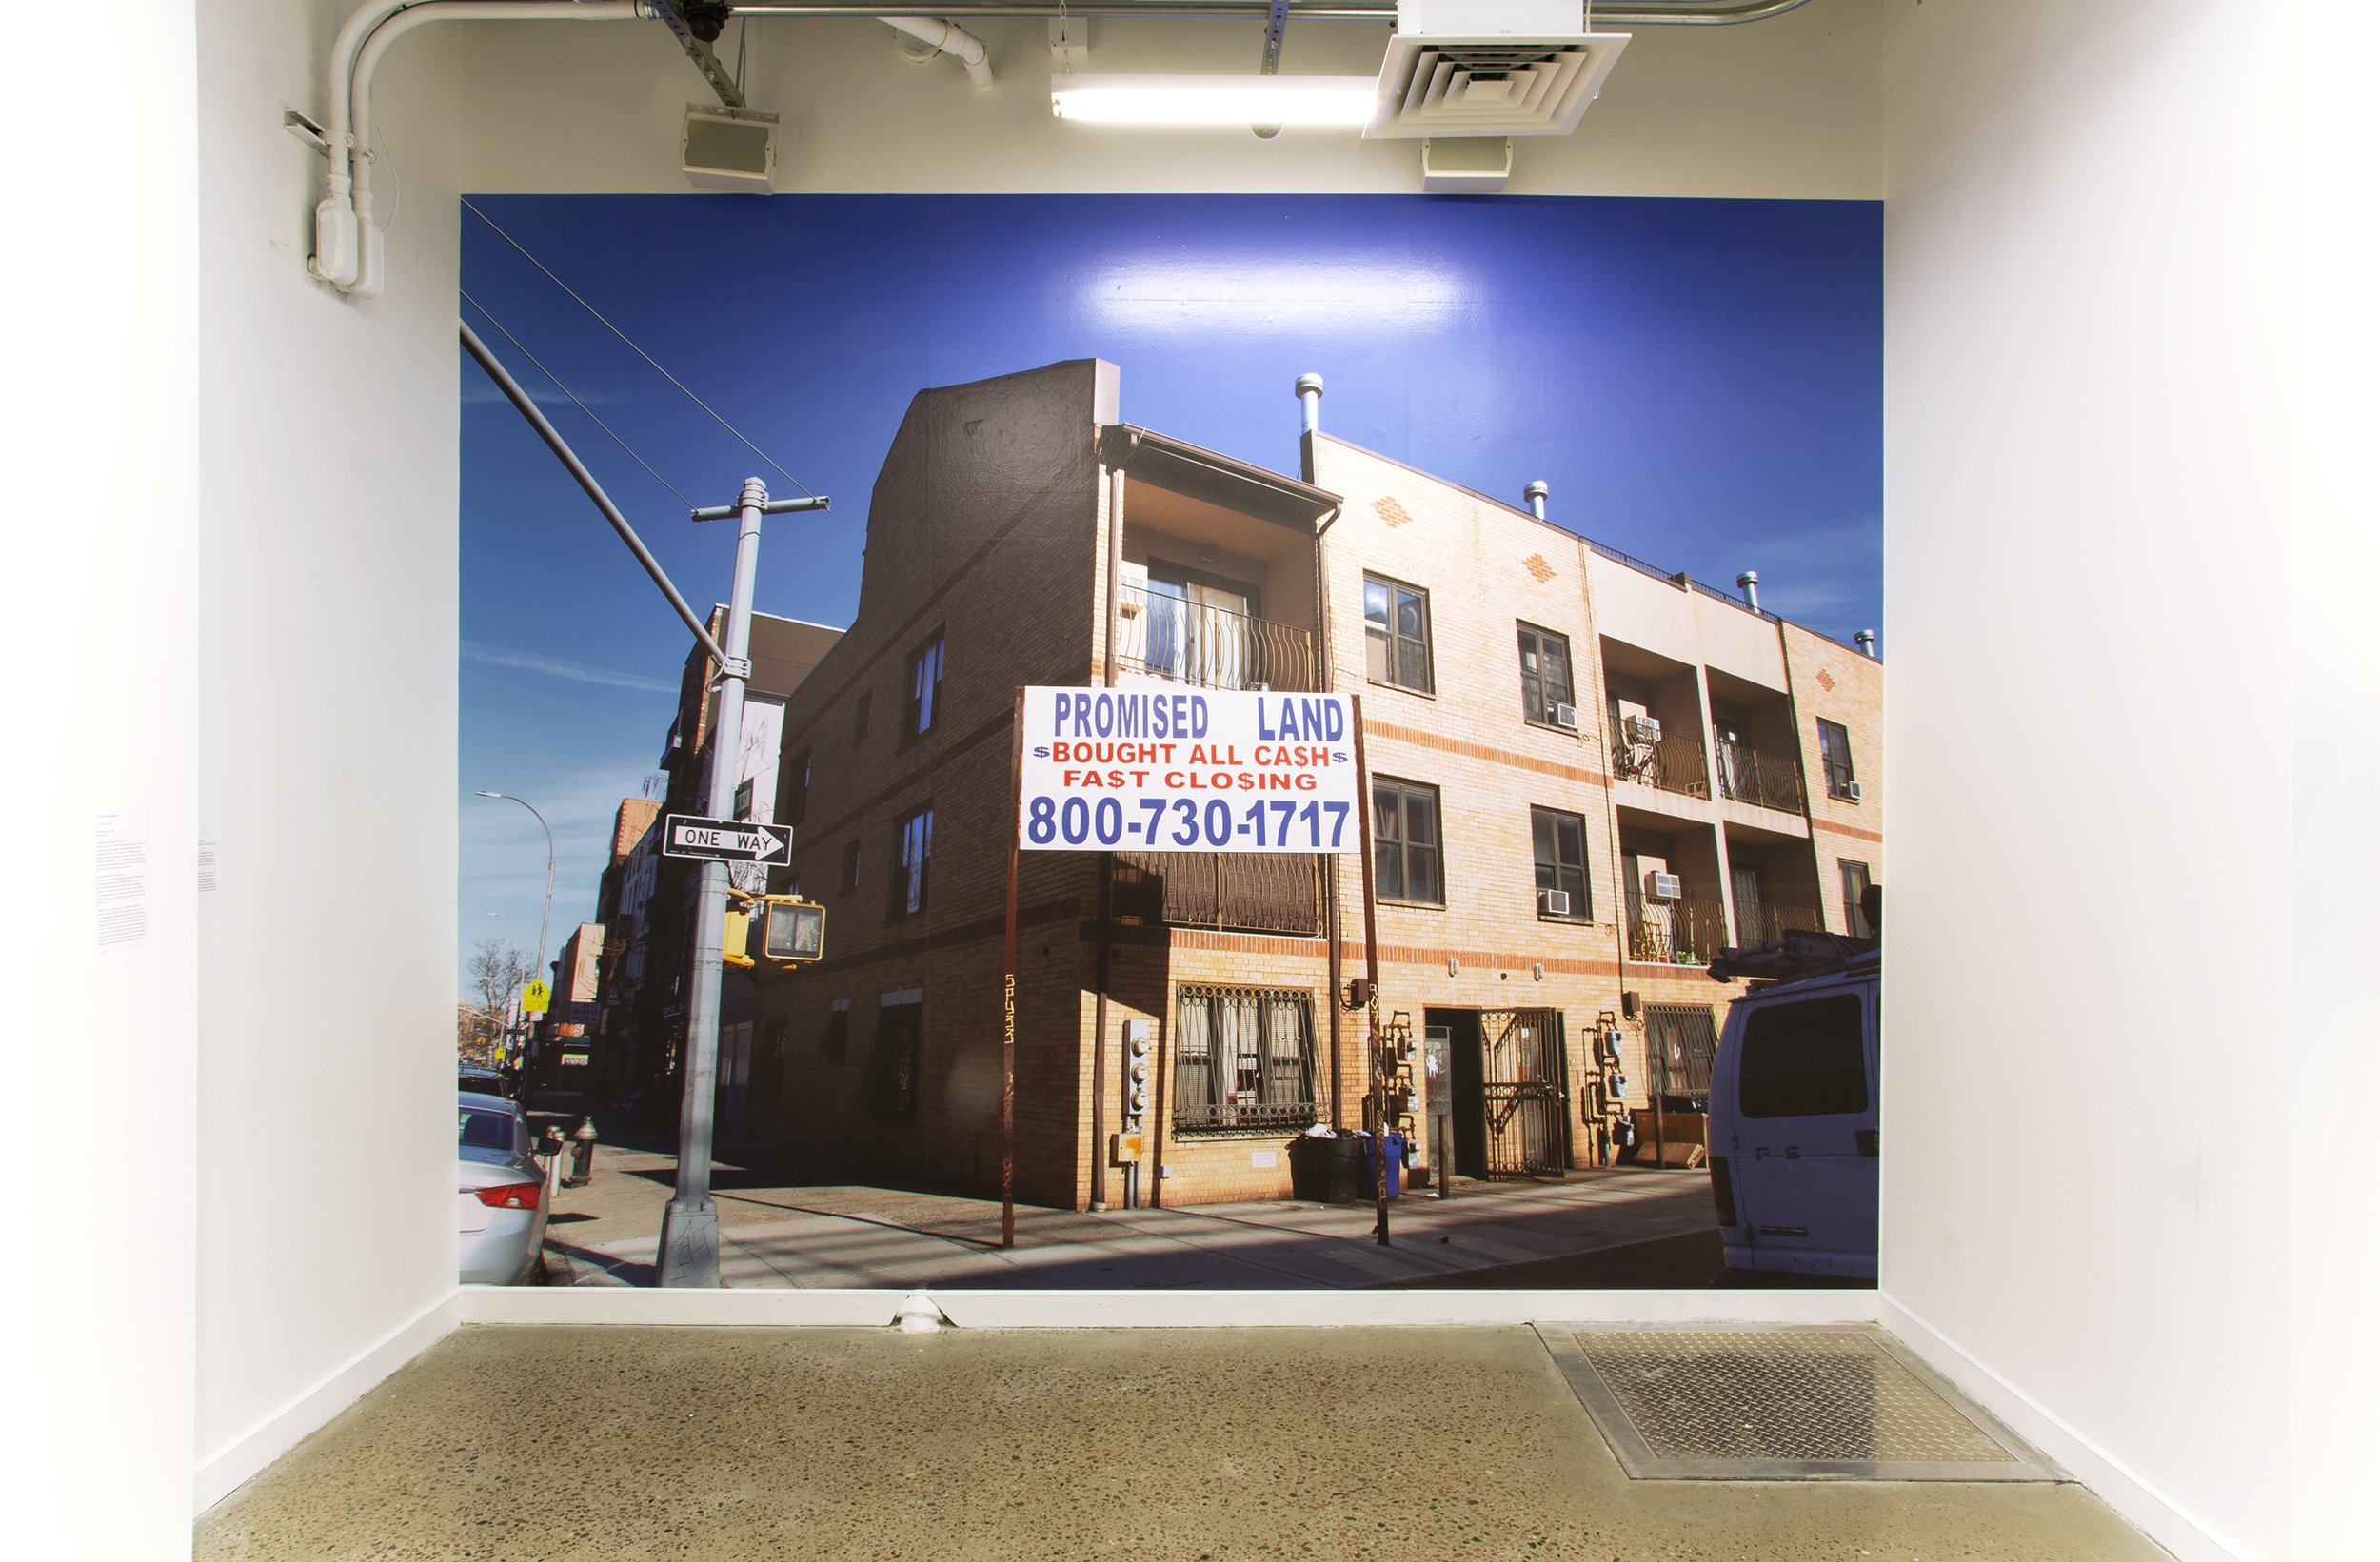   Promised Land (Brooklyn, NY, #2), 2019  Installation View,  Virtual and Real Estate , BRIC, Brooklyn, NY site-specific wall decal 120 x 156.5 inches 